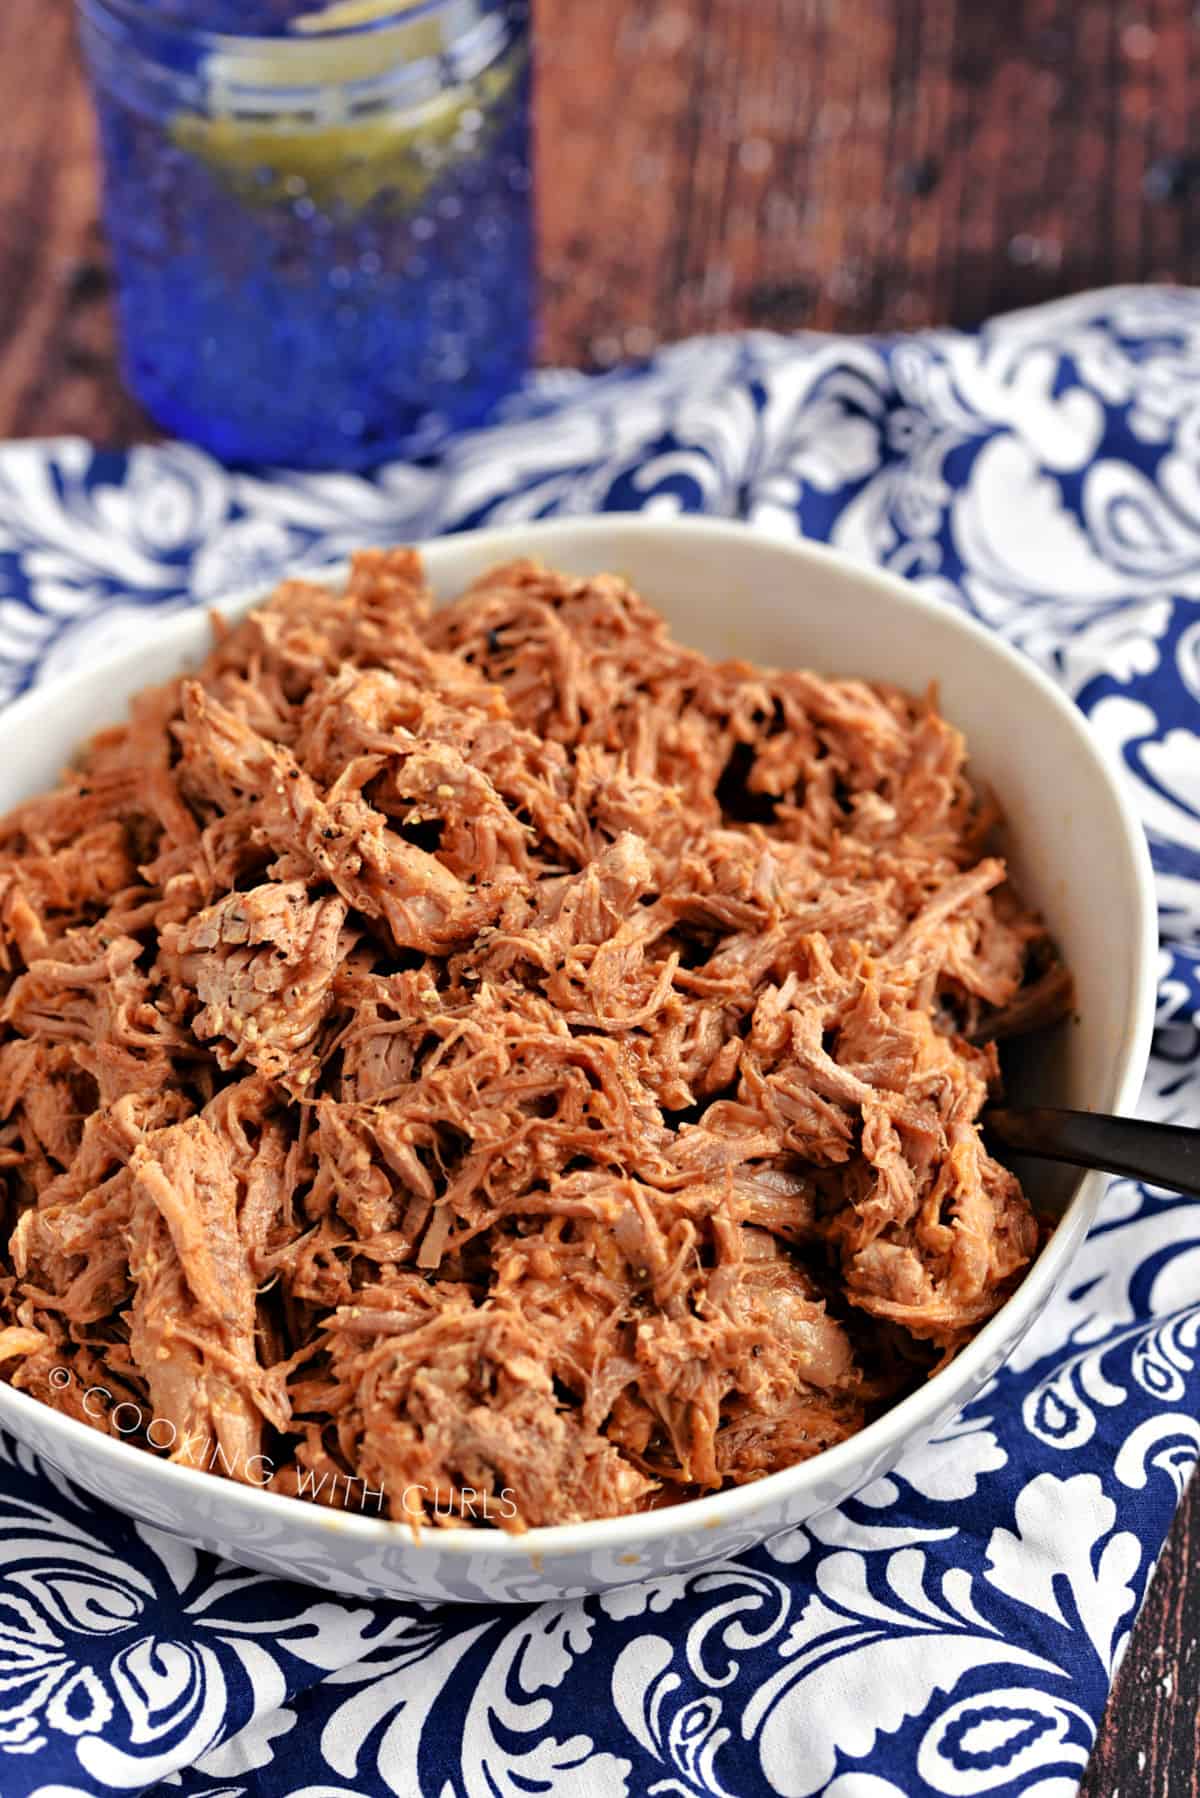 A large white bowl filled with Instant Pot Pulled Pork sitting on a blue and white designed napkin with a blue glass in the background.